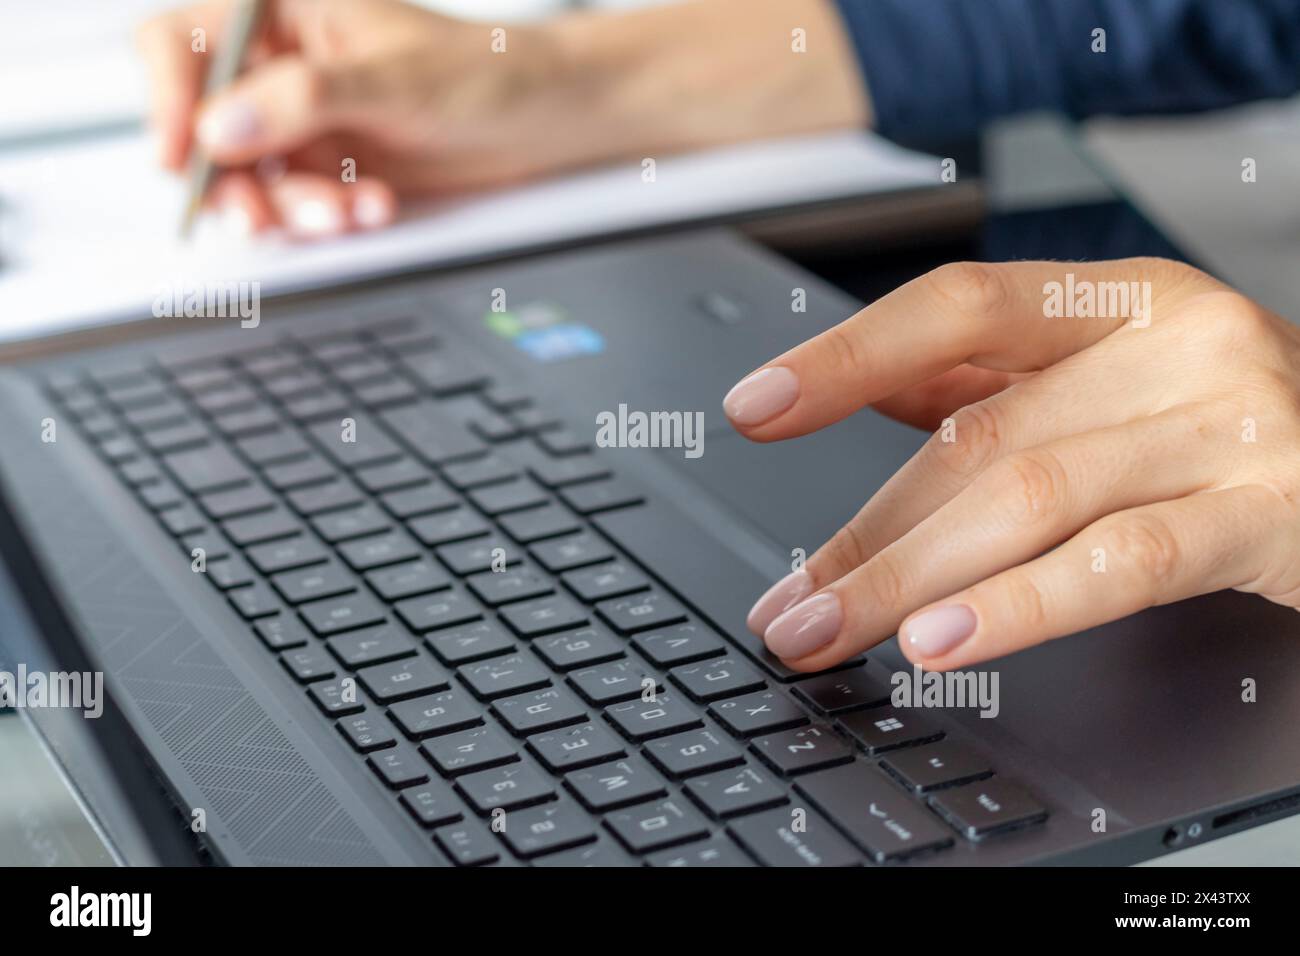 Close up shot of the woman with beautiful hands in the business attire, working on the laptop in the office, making notes Stock Photo